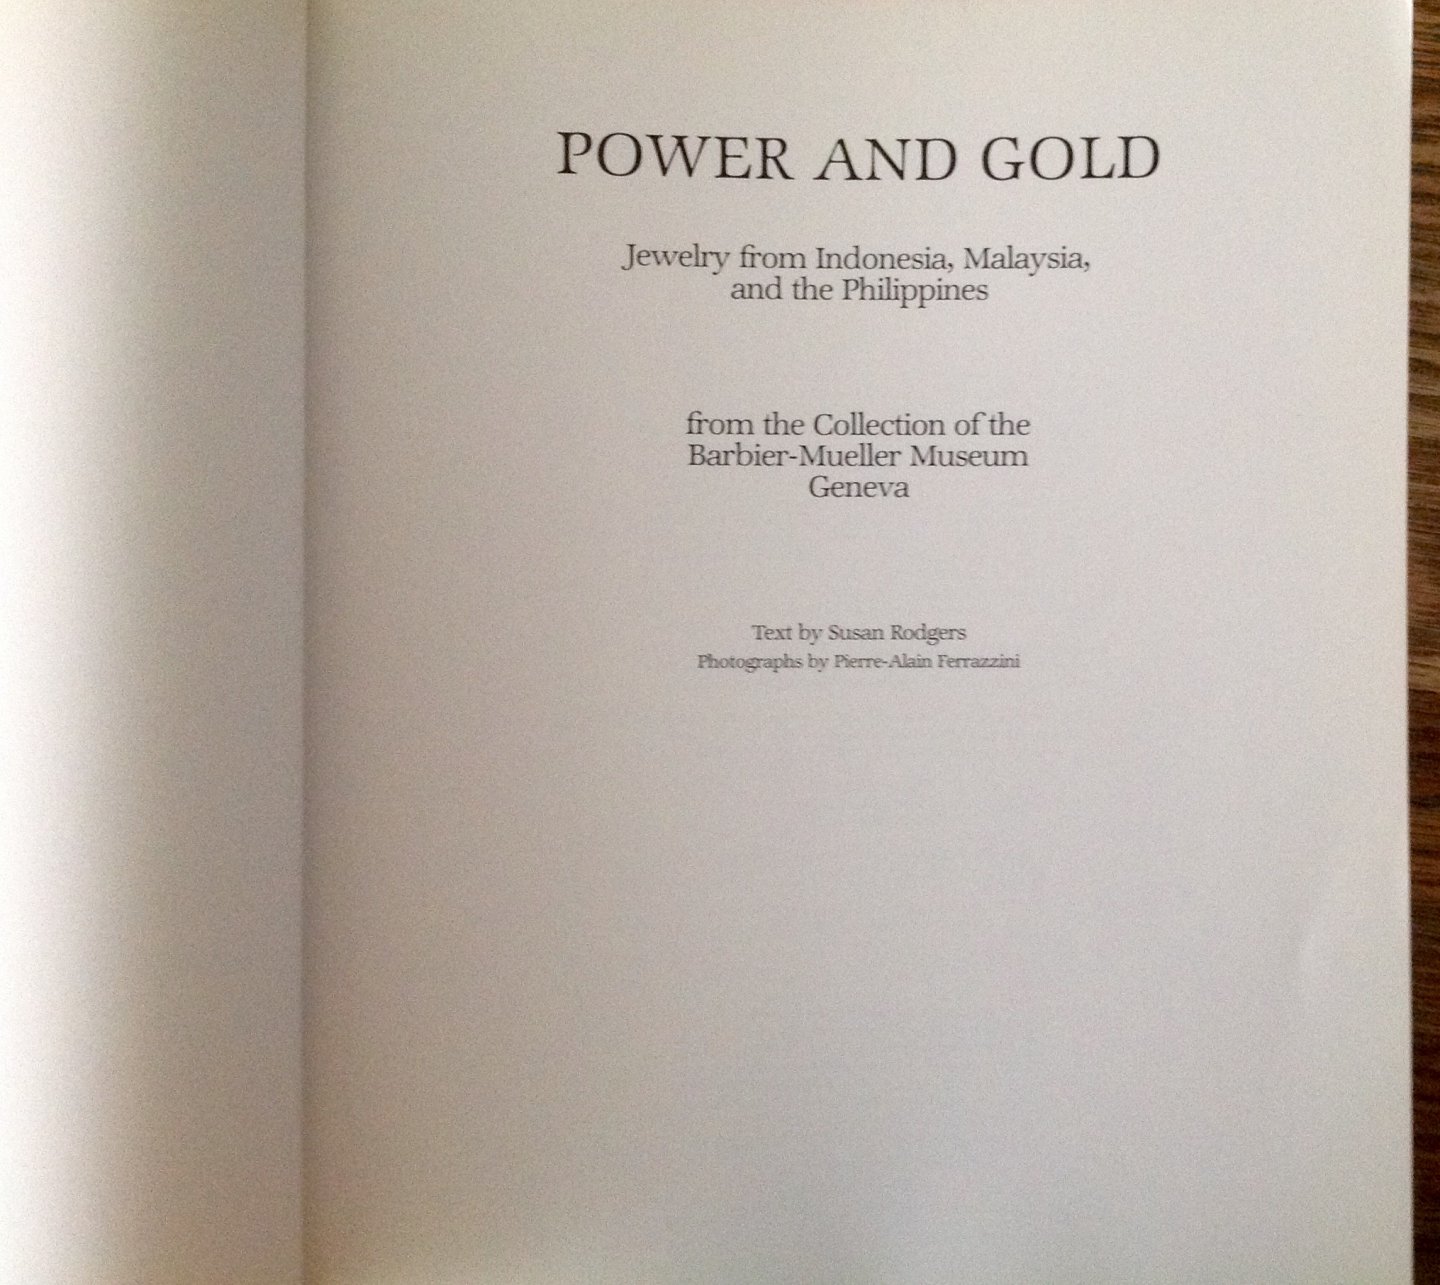 Rodgers, Susan - Power and Gold. Jewelry from Indonesia, Malaysia and the Philippines